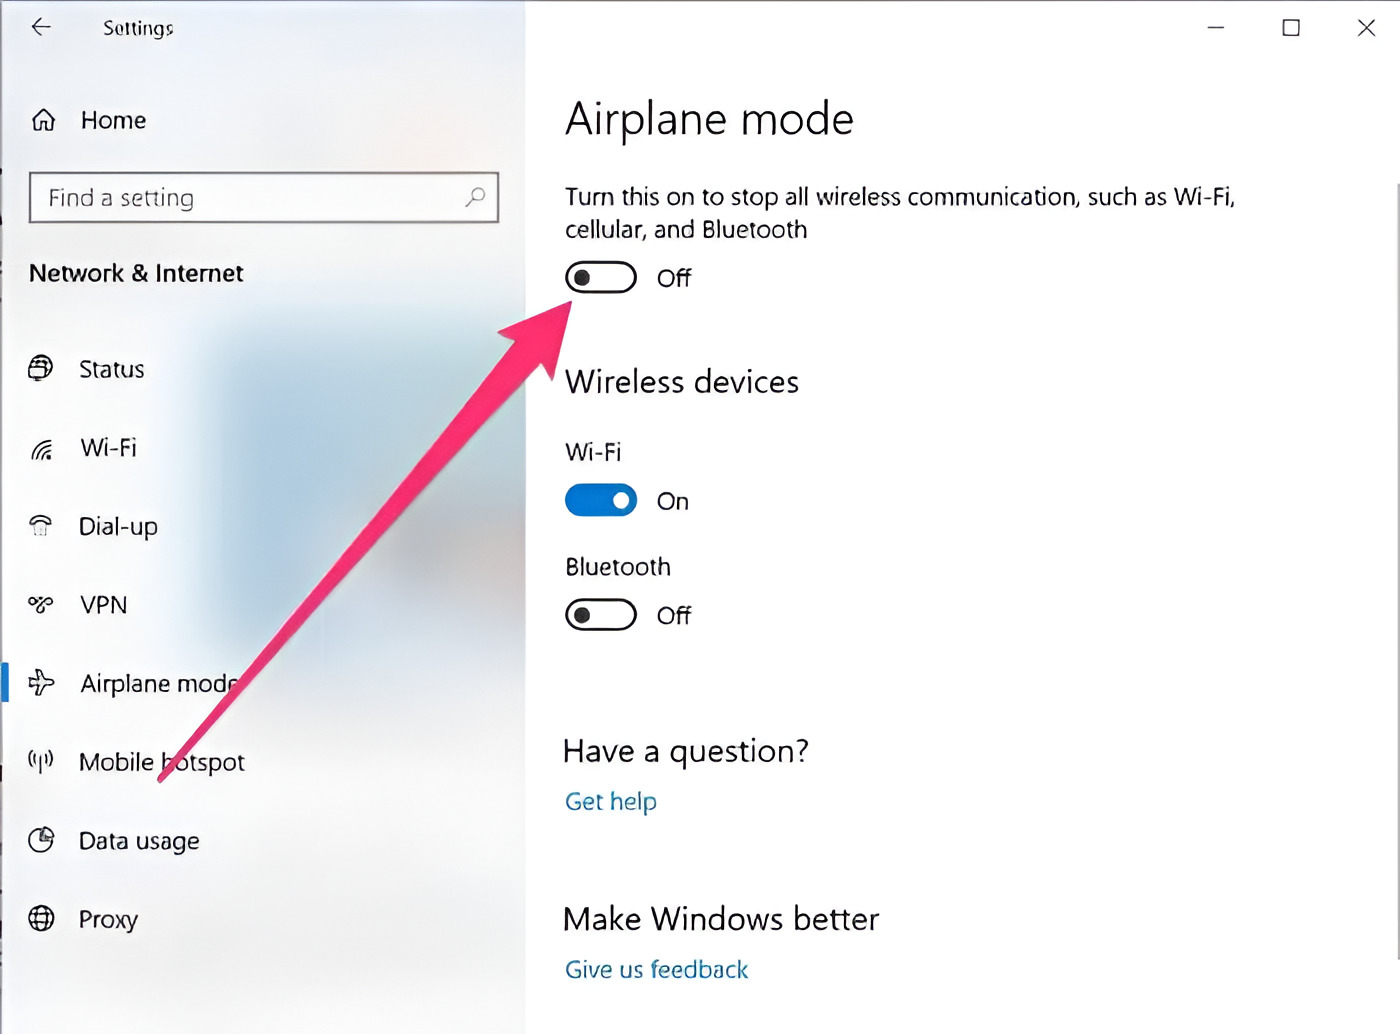 How To Disable Airplane Mode In Windows 10 On A Sony Vaio T Series Ultrabook